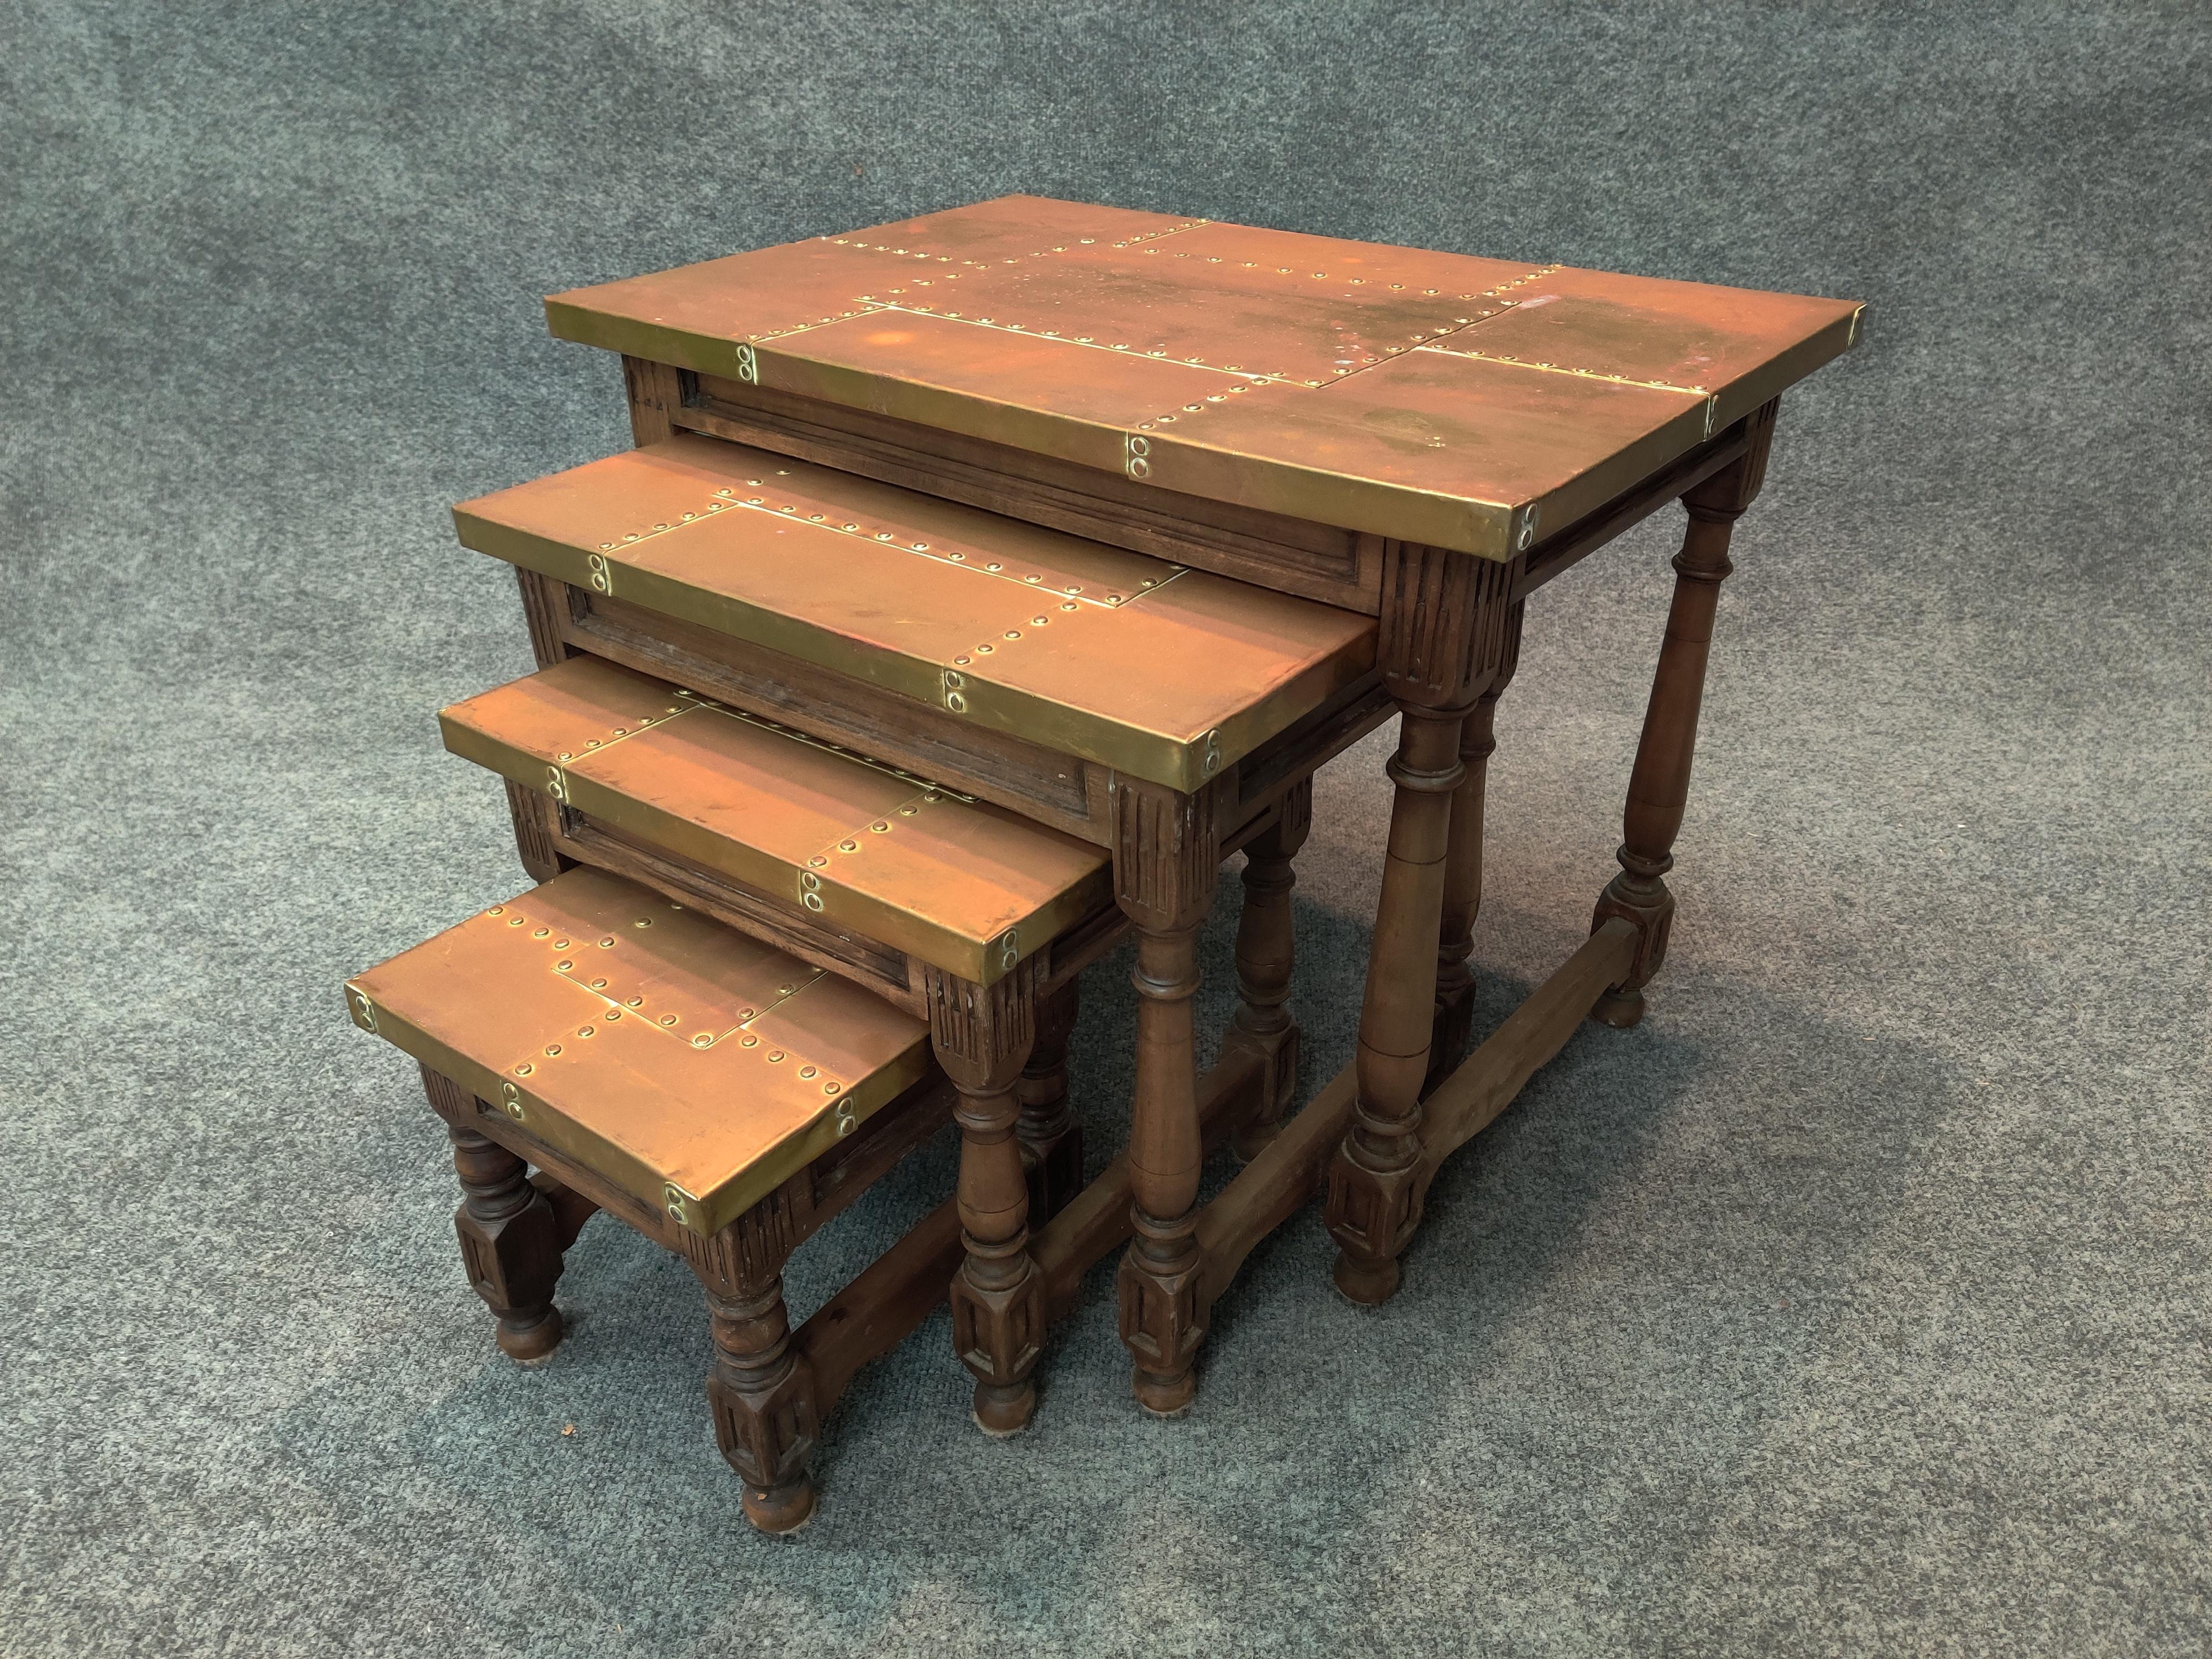 Set of 4 campaign style vintage and authentic Sarreid, Ltd rare nesting tables. Heavily riveted brass over wood tops mounted on intricately carved solid wood legs. Some oxidation to original brass finish. Also, shallow minor dings and dents to each.